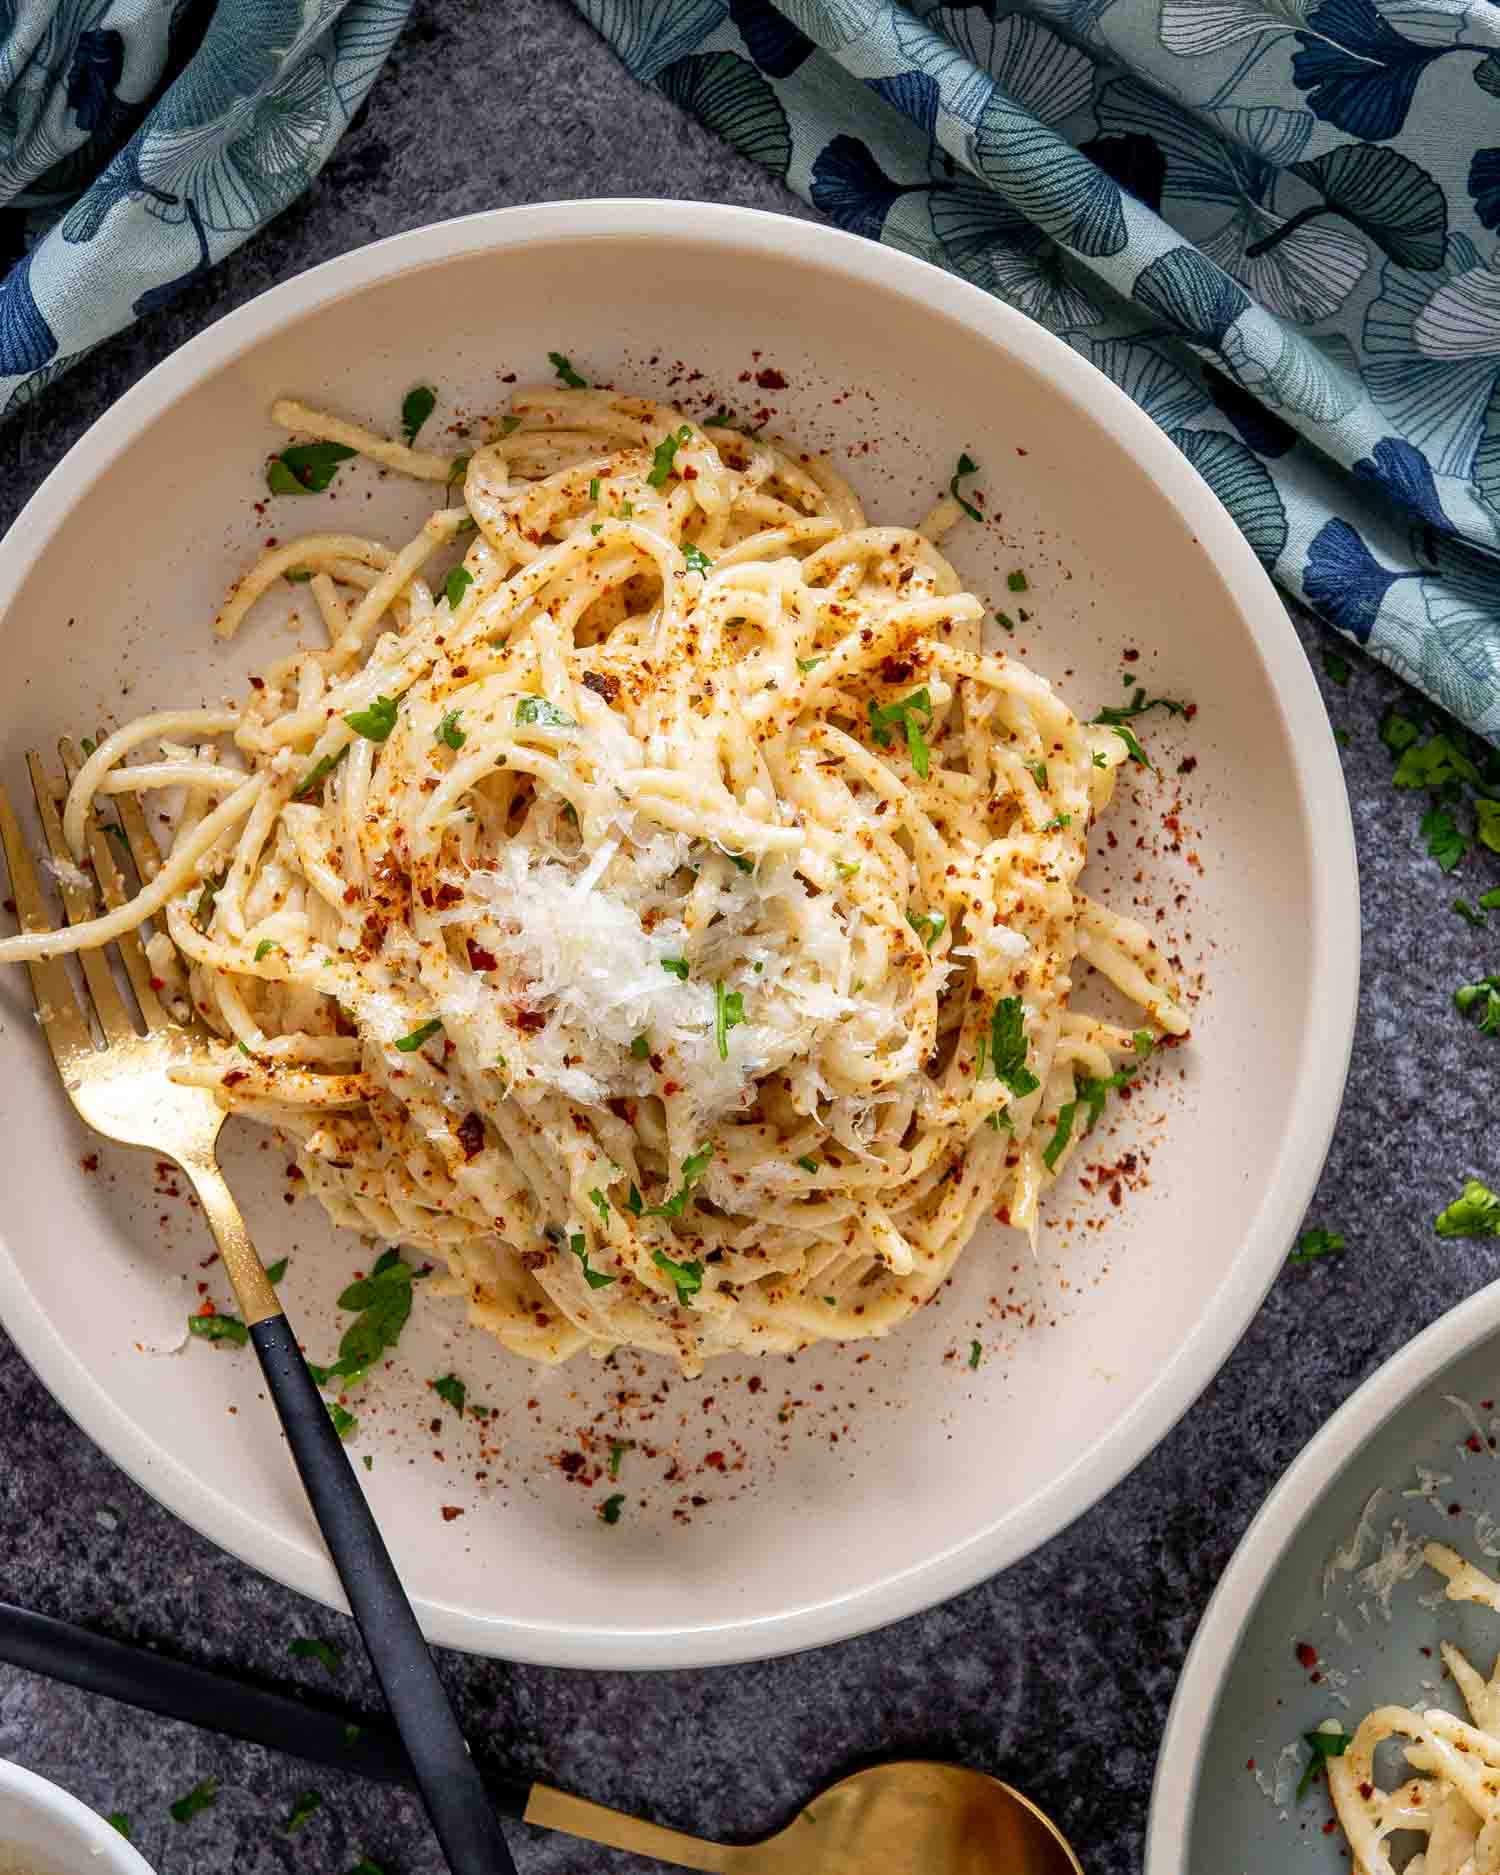 garlic butter spaghetti in a white bowl garnished with parsley and red pepper flakes.